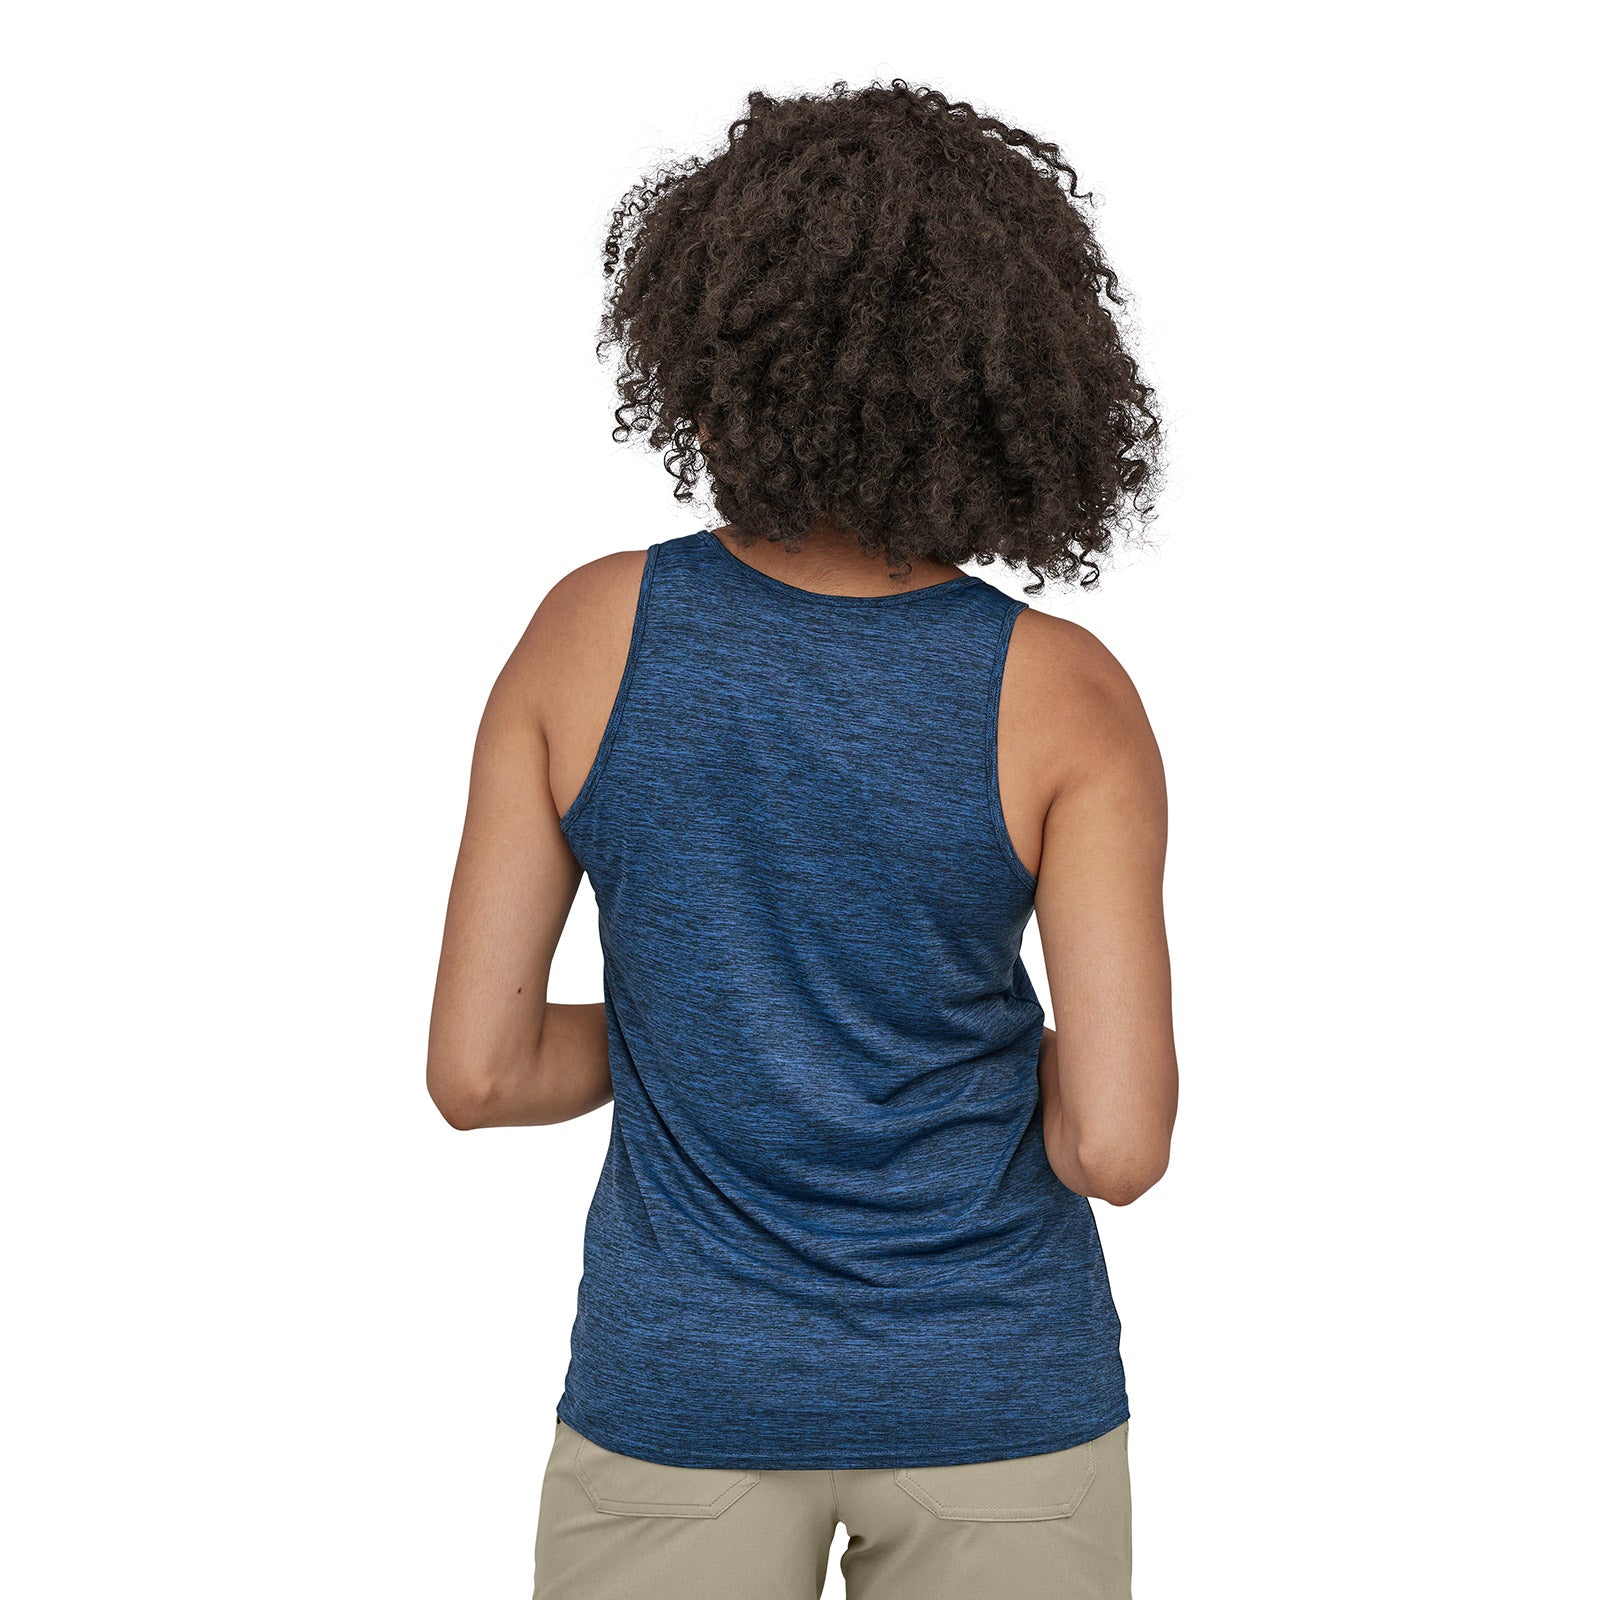 patagonia women's capilene cool daily tank in viking blue - navy blue x dye on a model, back view